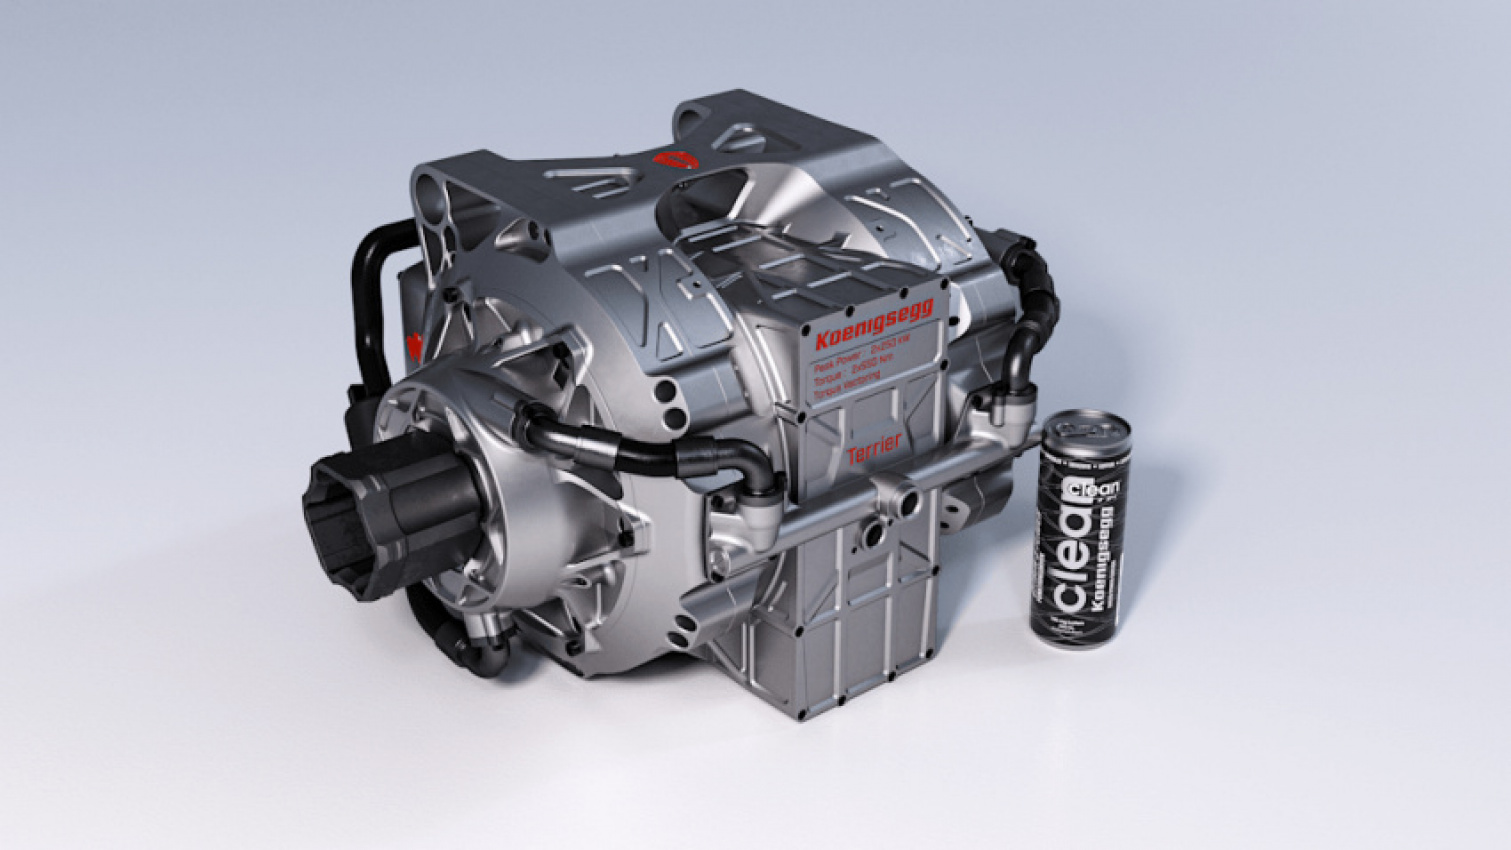 autos, cars, koenigsegg, mini, electric, emerging technologies, future vehicles, green, hybrid, luxury, performance, sedan, special and limited editions, technology, koenigsegg quark e-motor puts maxi power in a mini package